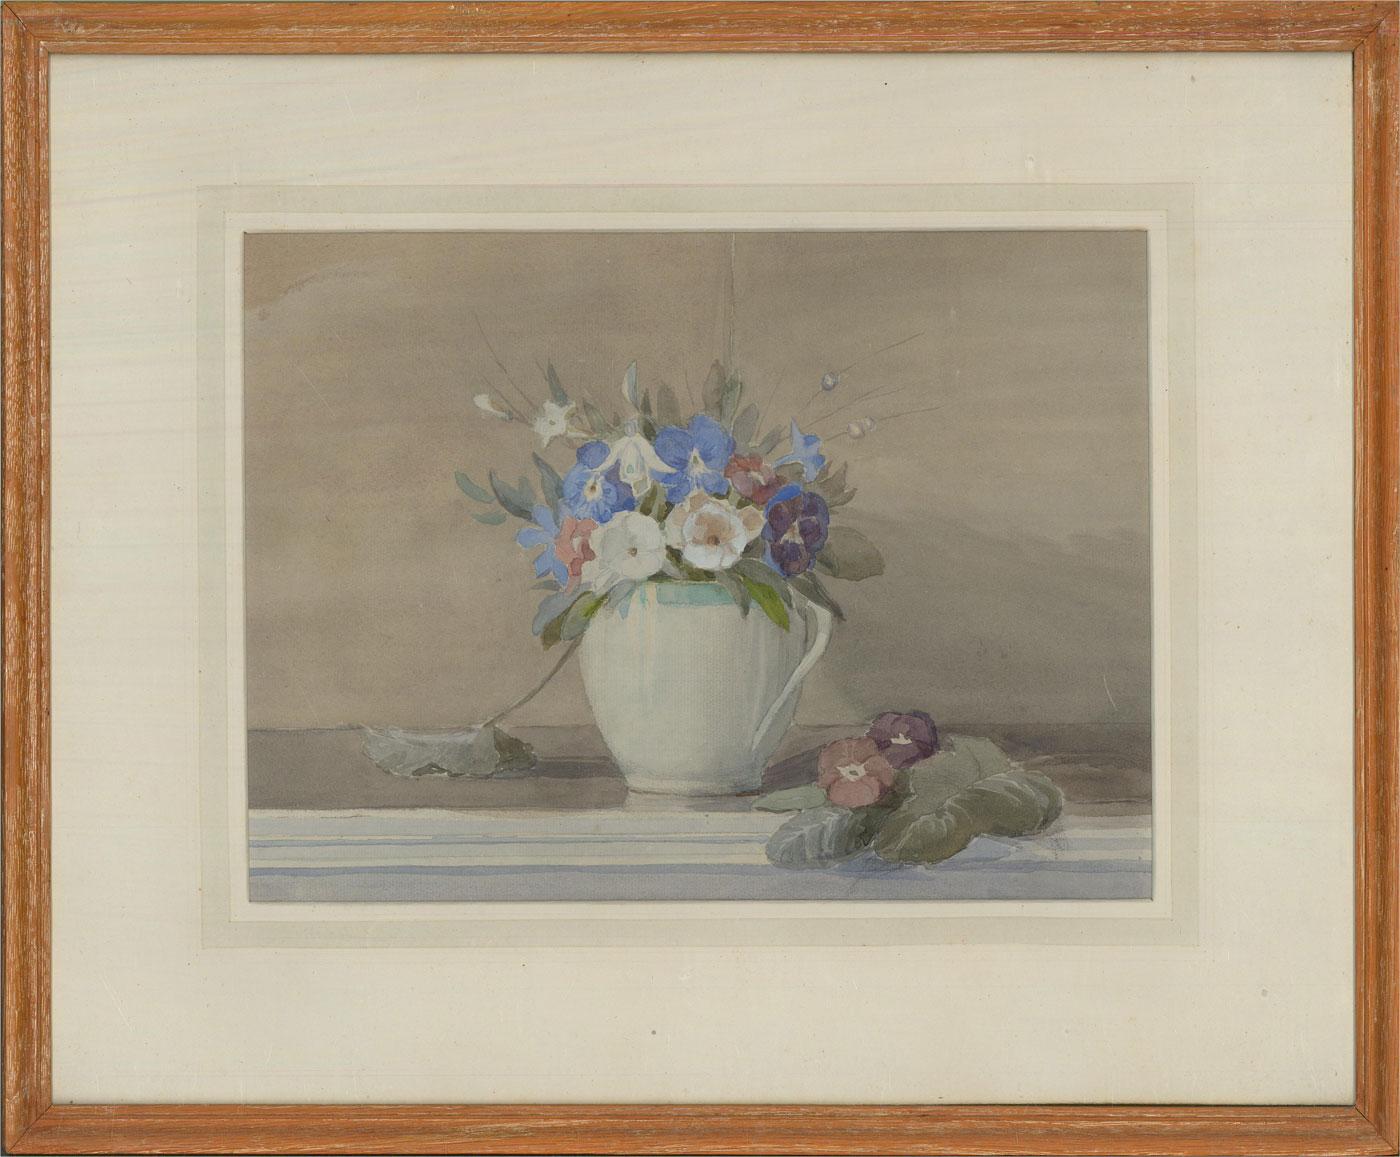 A charming watercolour study of fresh spring flowers presented in a cream jug with blue rim. The jug has been carefully placed on a table top with the excess leaves and flowers left around it. Well presented in a cream mount and simple wooden frame.